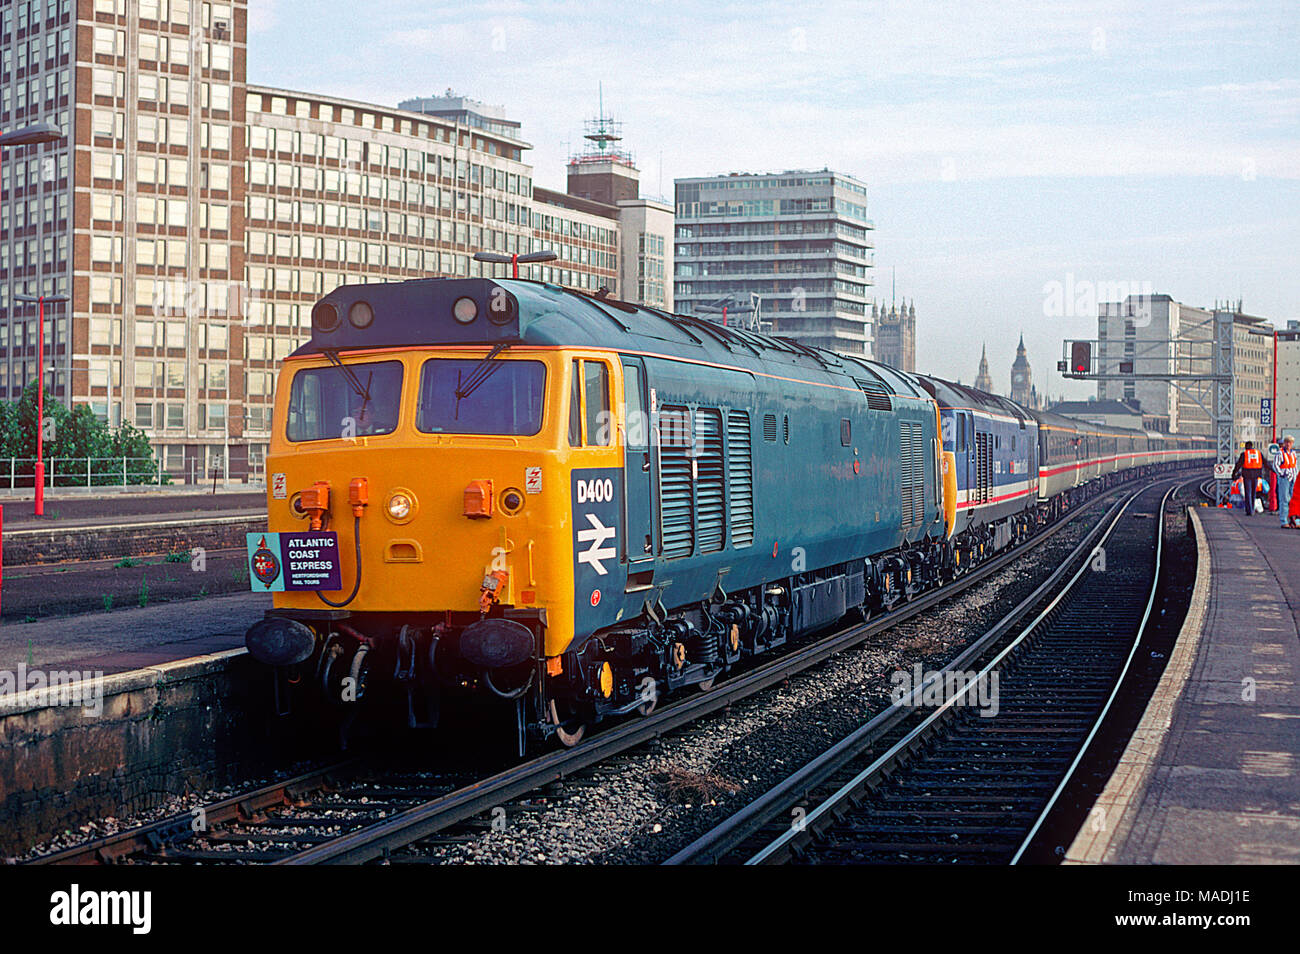 A pair of class 50 diesel locomotives numbers 50050 (D400) and 50033 'Glorious' double heading Hertfordshire Rail Tours 'Atlantic Coast Express' at Vauxhall in west London on the18th July 1993. Stock Photo